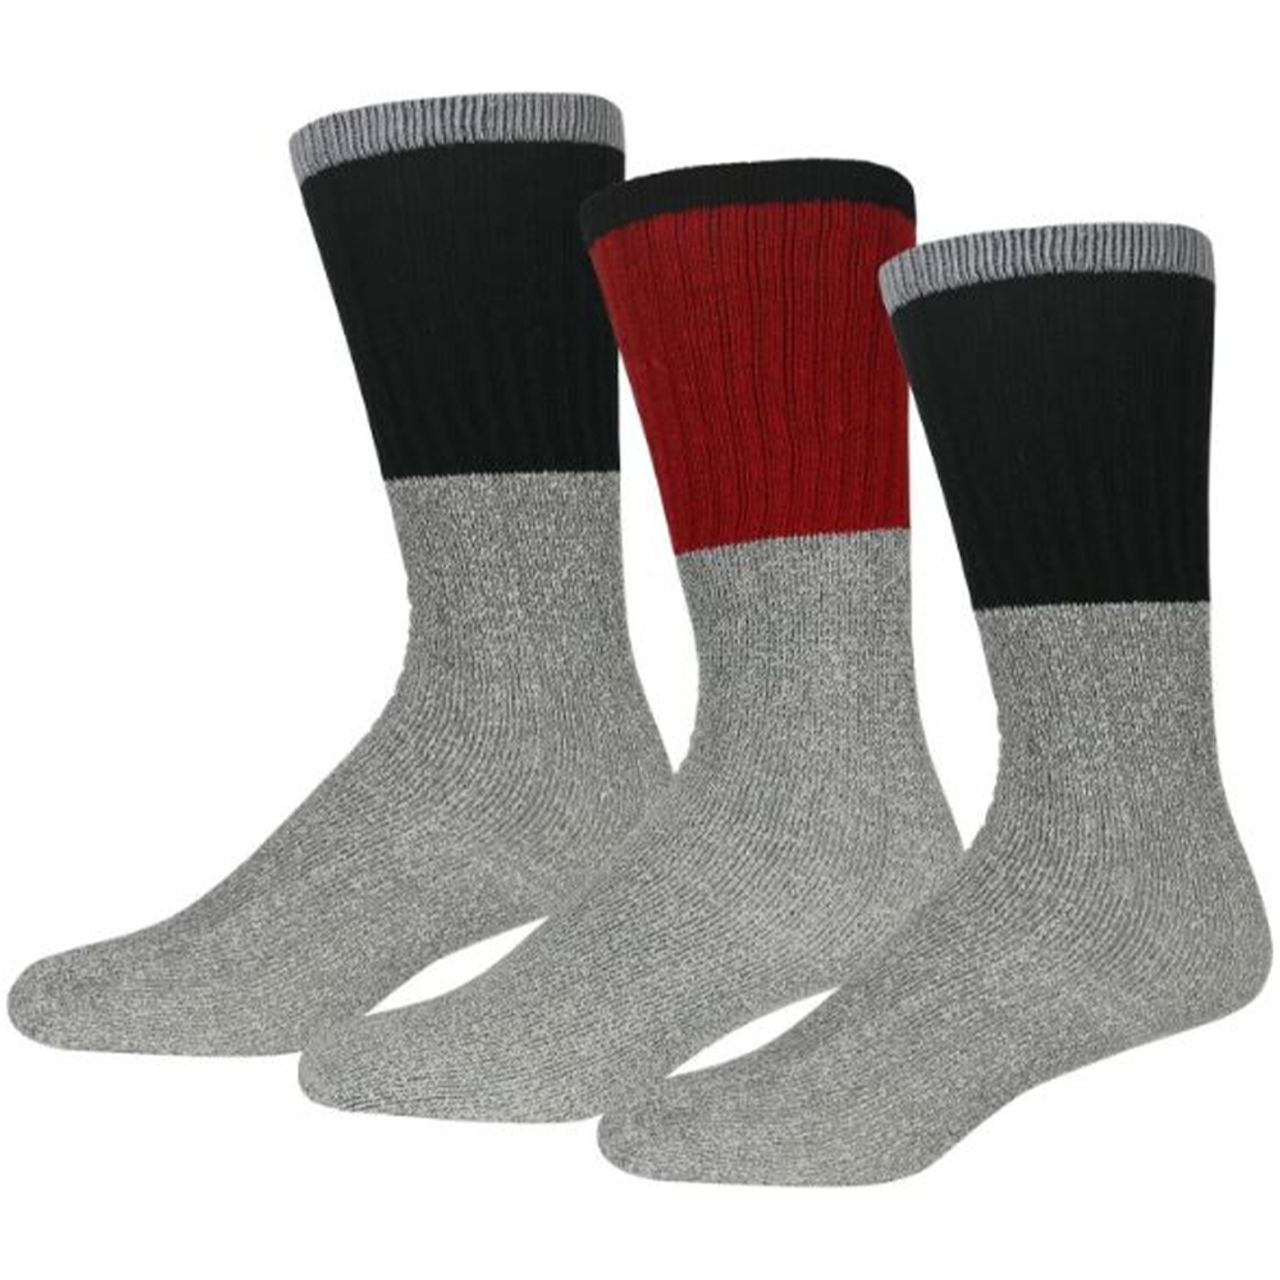 Insulated Thermal Cold Weather Crew Socks (9-Pairs)